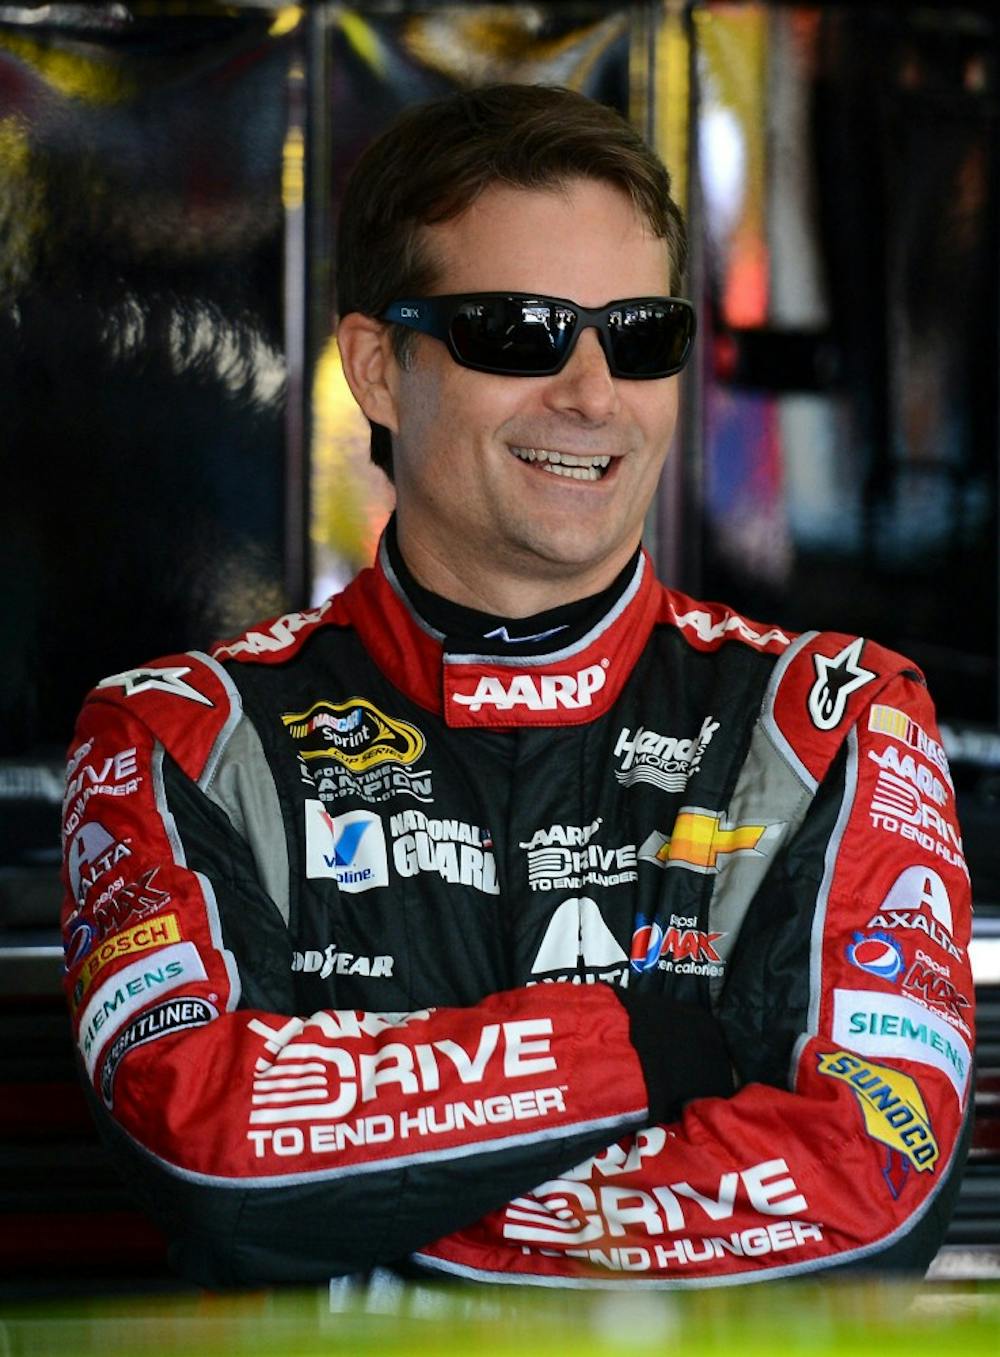 NASCAR Sprint Cup Series driver Jeff Gordon waits in the garage prior to practice at Charlotte Motor Speedway in Concord, N.C., on Friday, May 16, 2014. (Jeff Siner/Charlotte Observer/MCT)